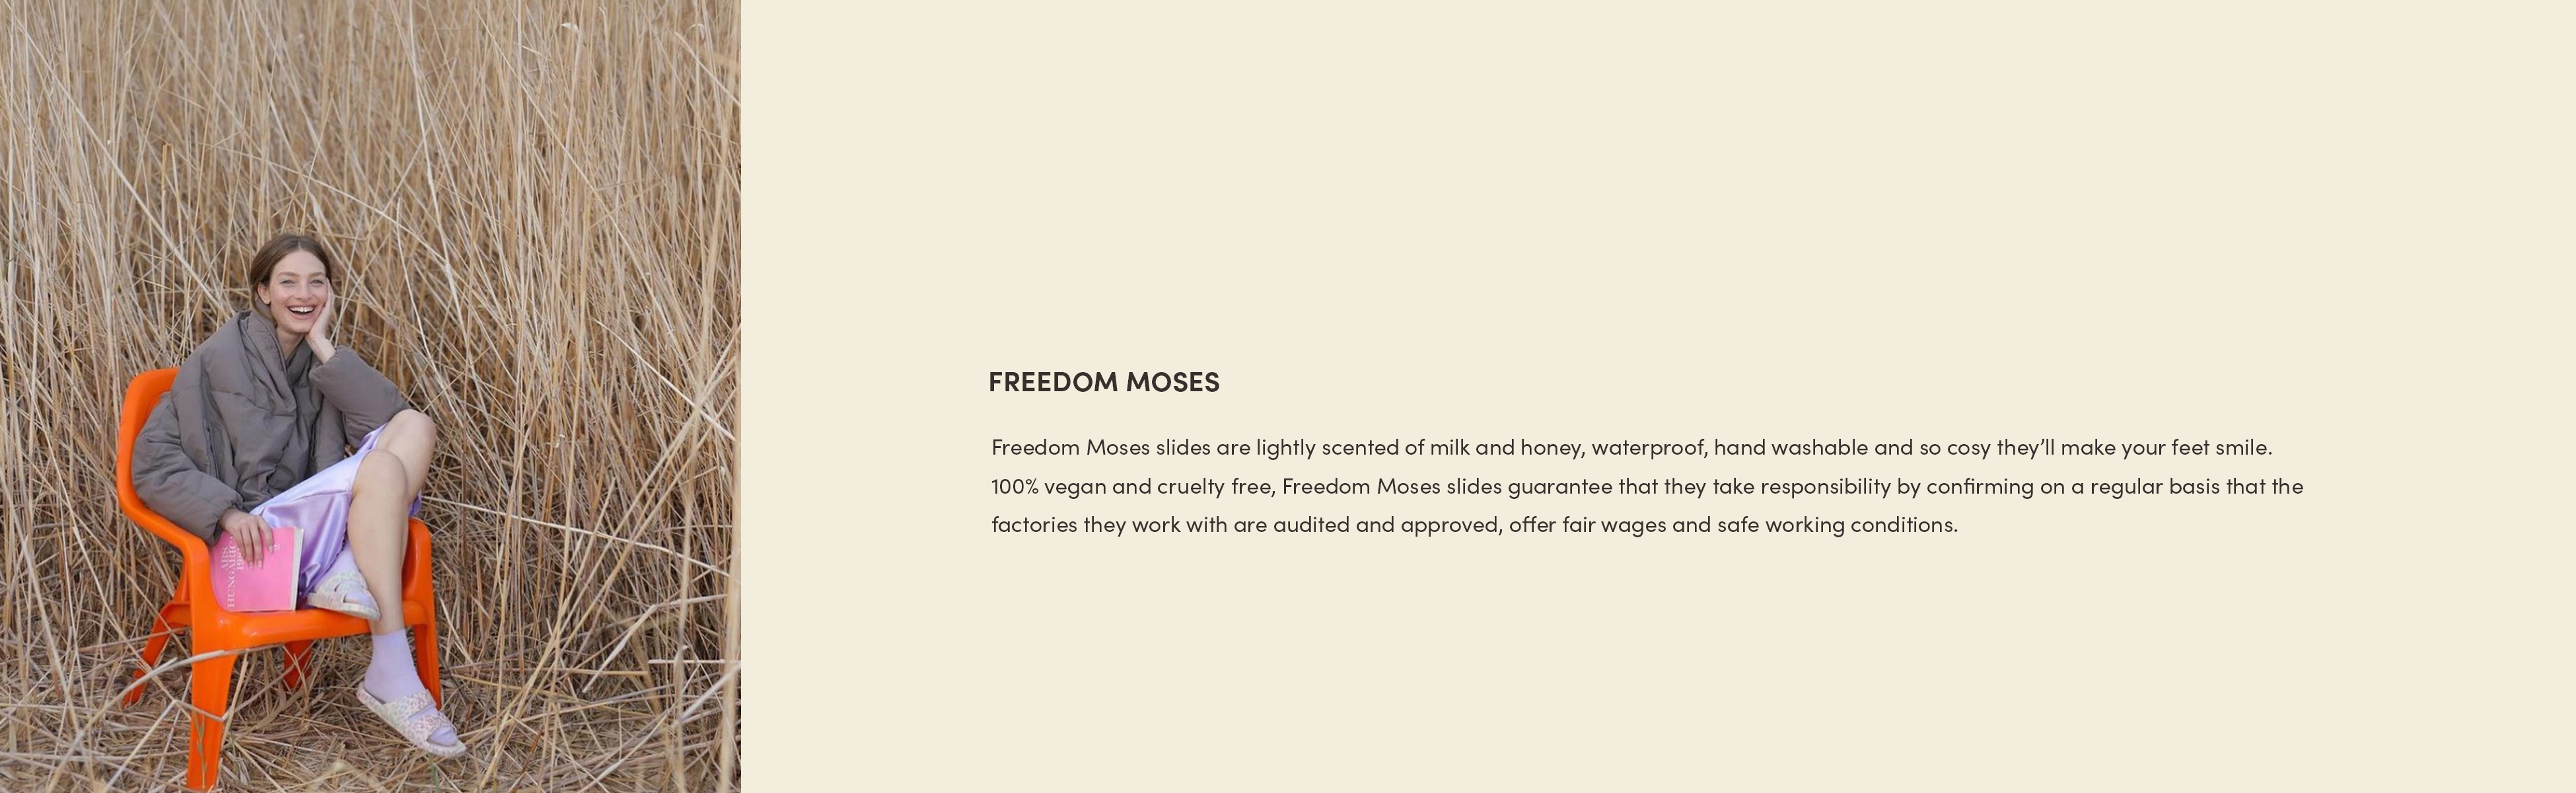 Freedom_Moses_banner